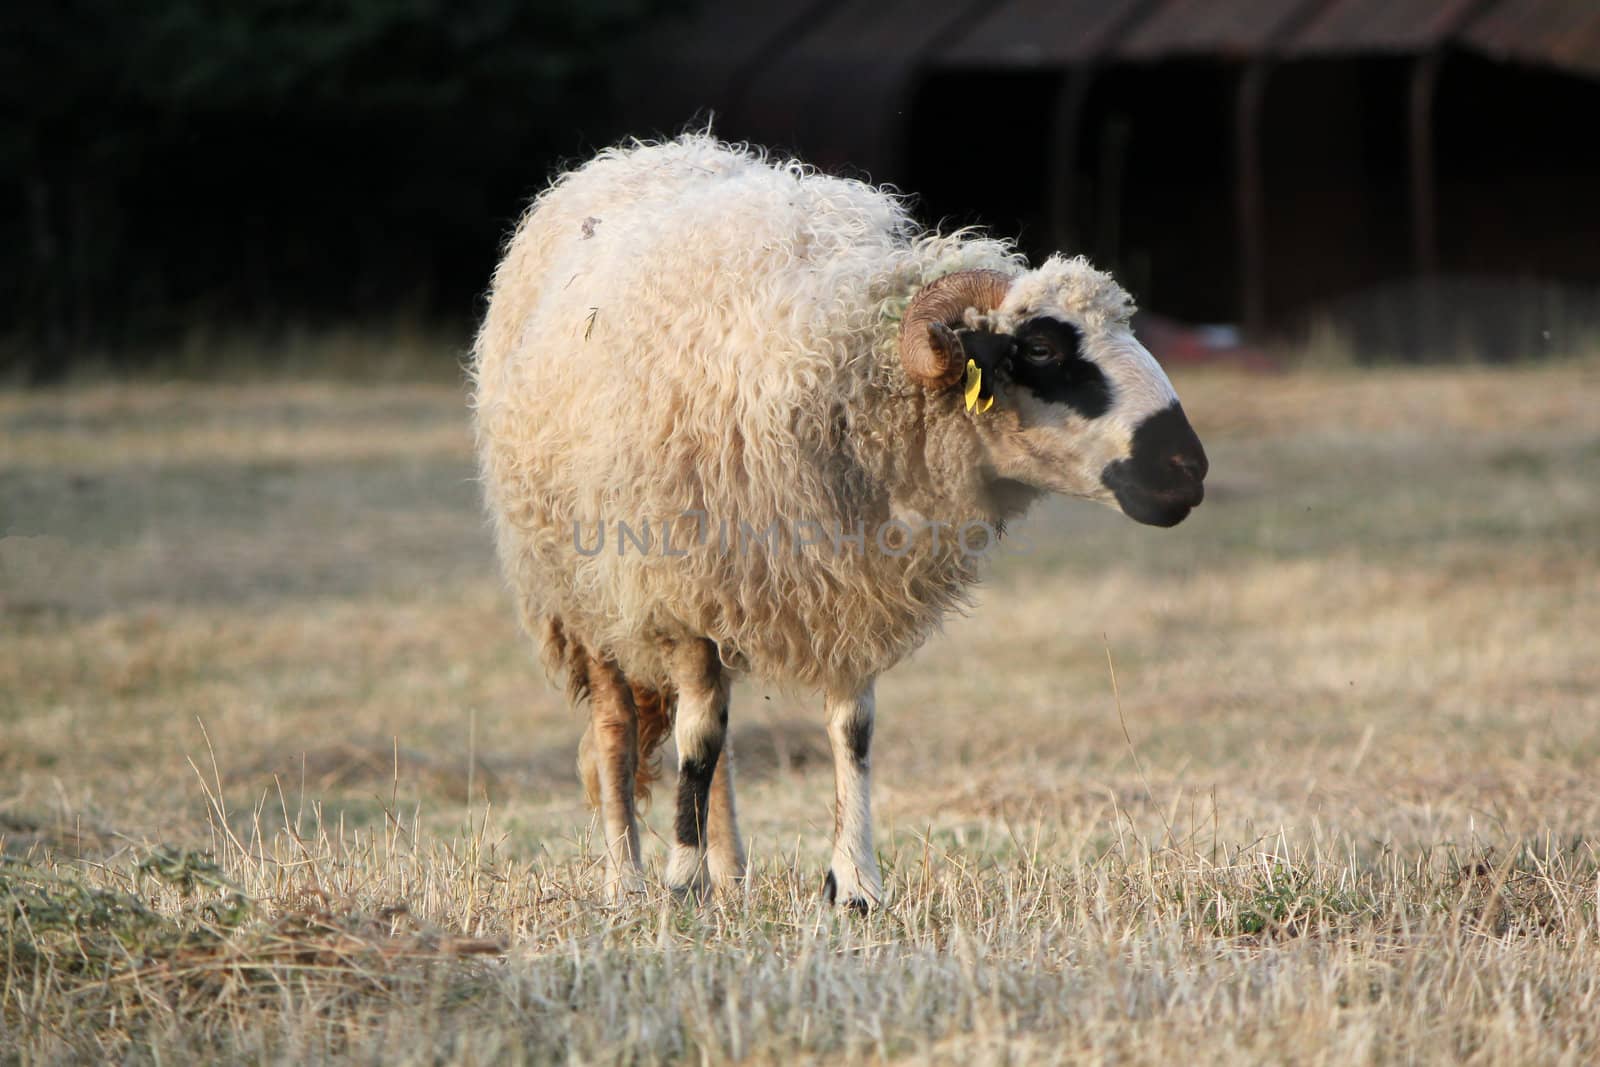 White and black male sheep or ram in a meadow